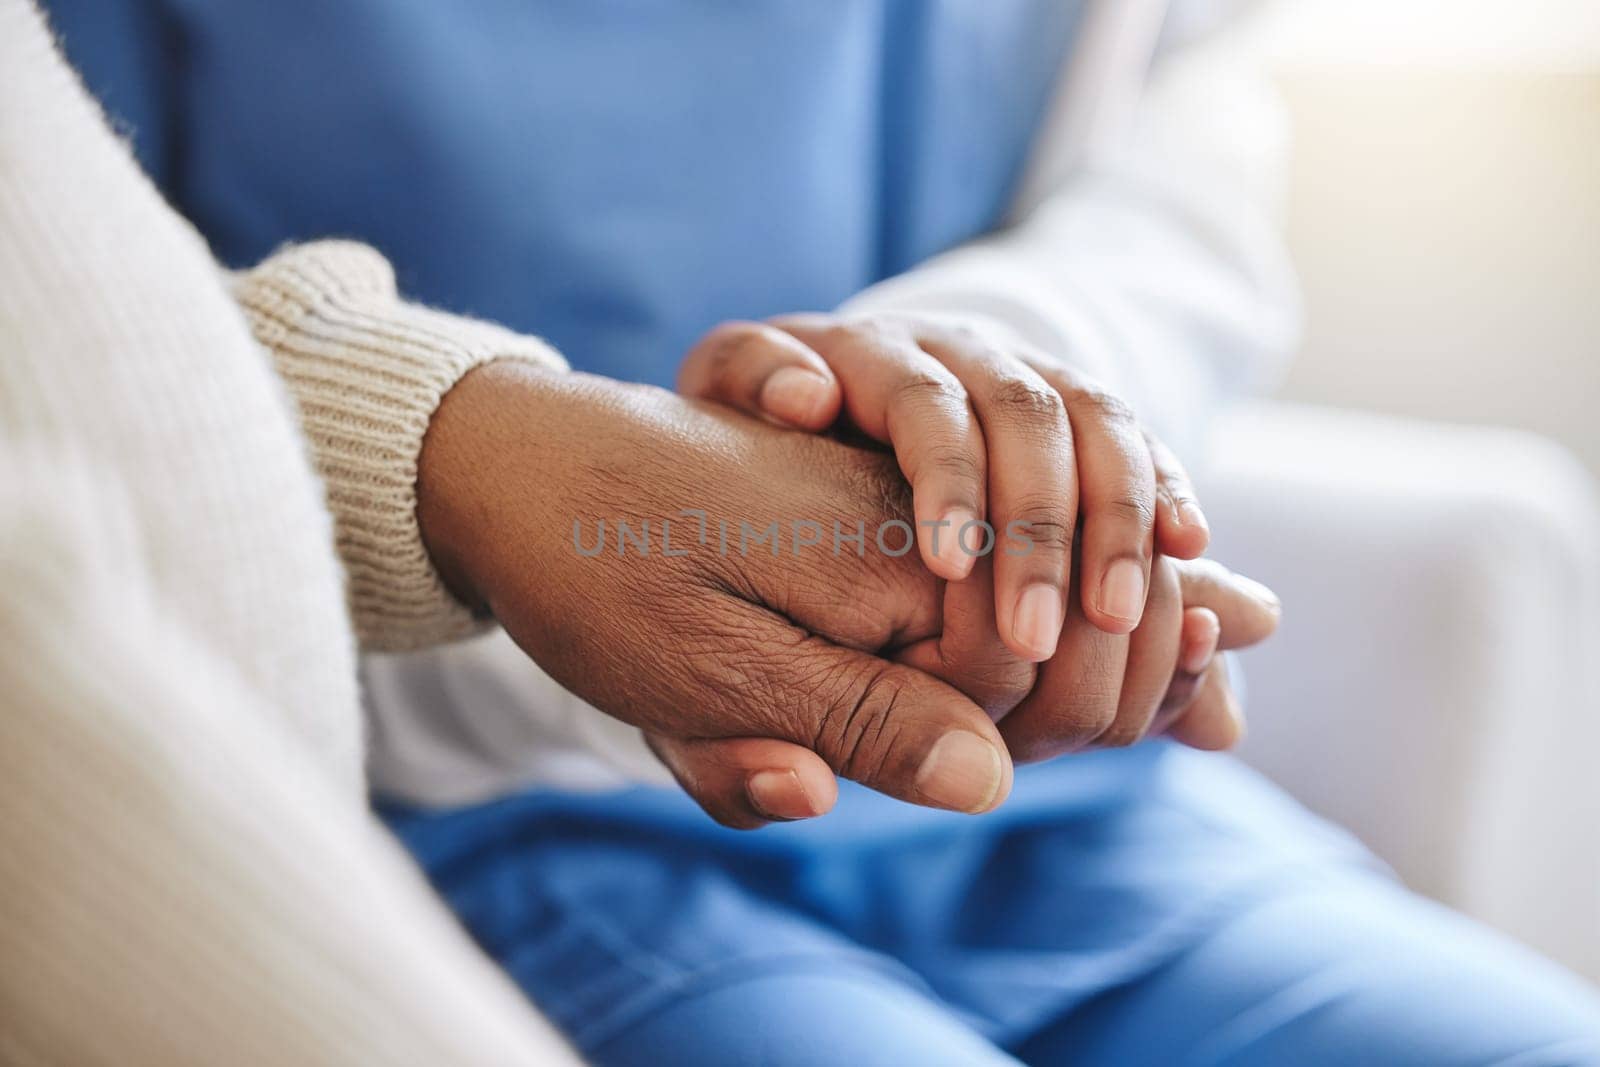 Senior patient, nurse and holding hands for support, healthcare or empathy at nursing home. Elderly person and caregiver together for trust, homecare and counseling or help for health in retirement by YuriArcurs